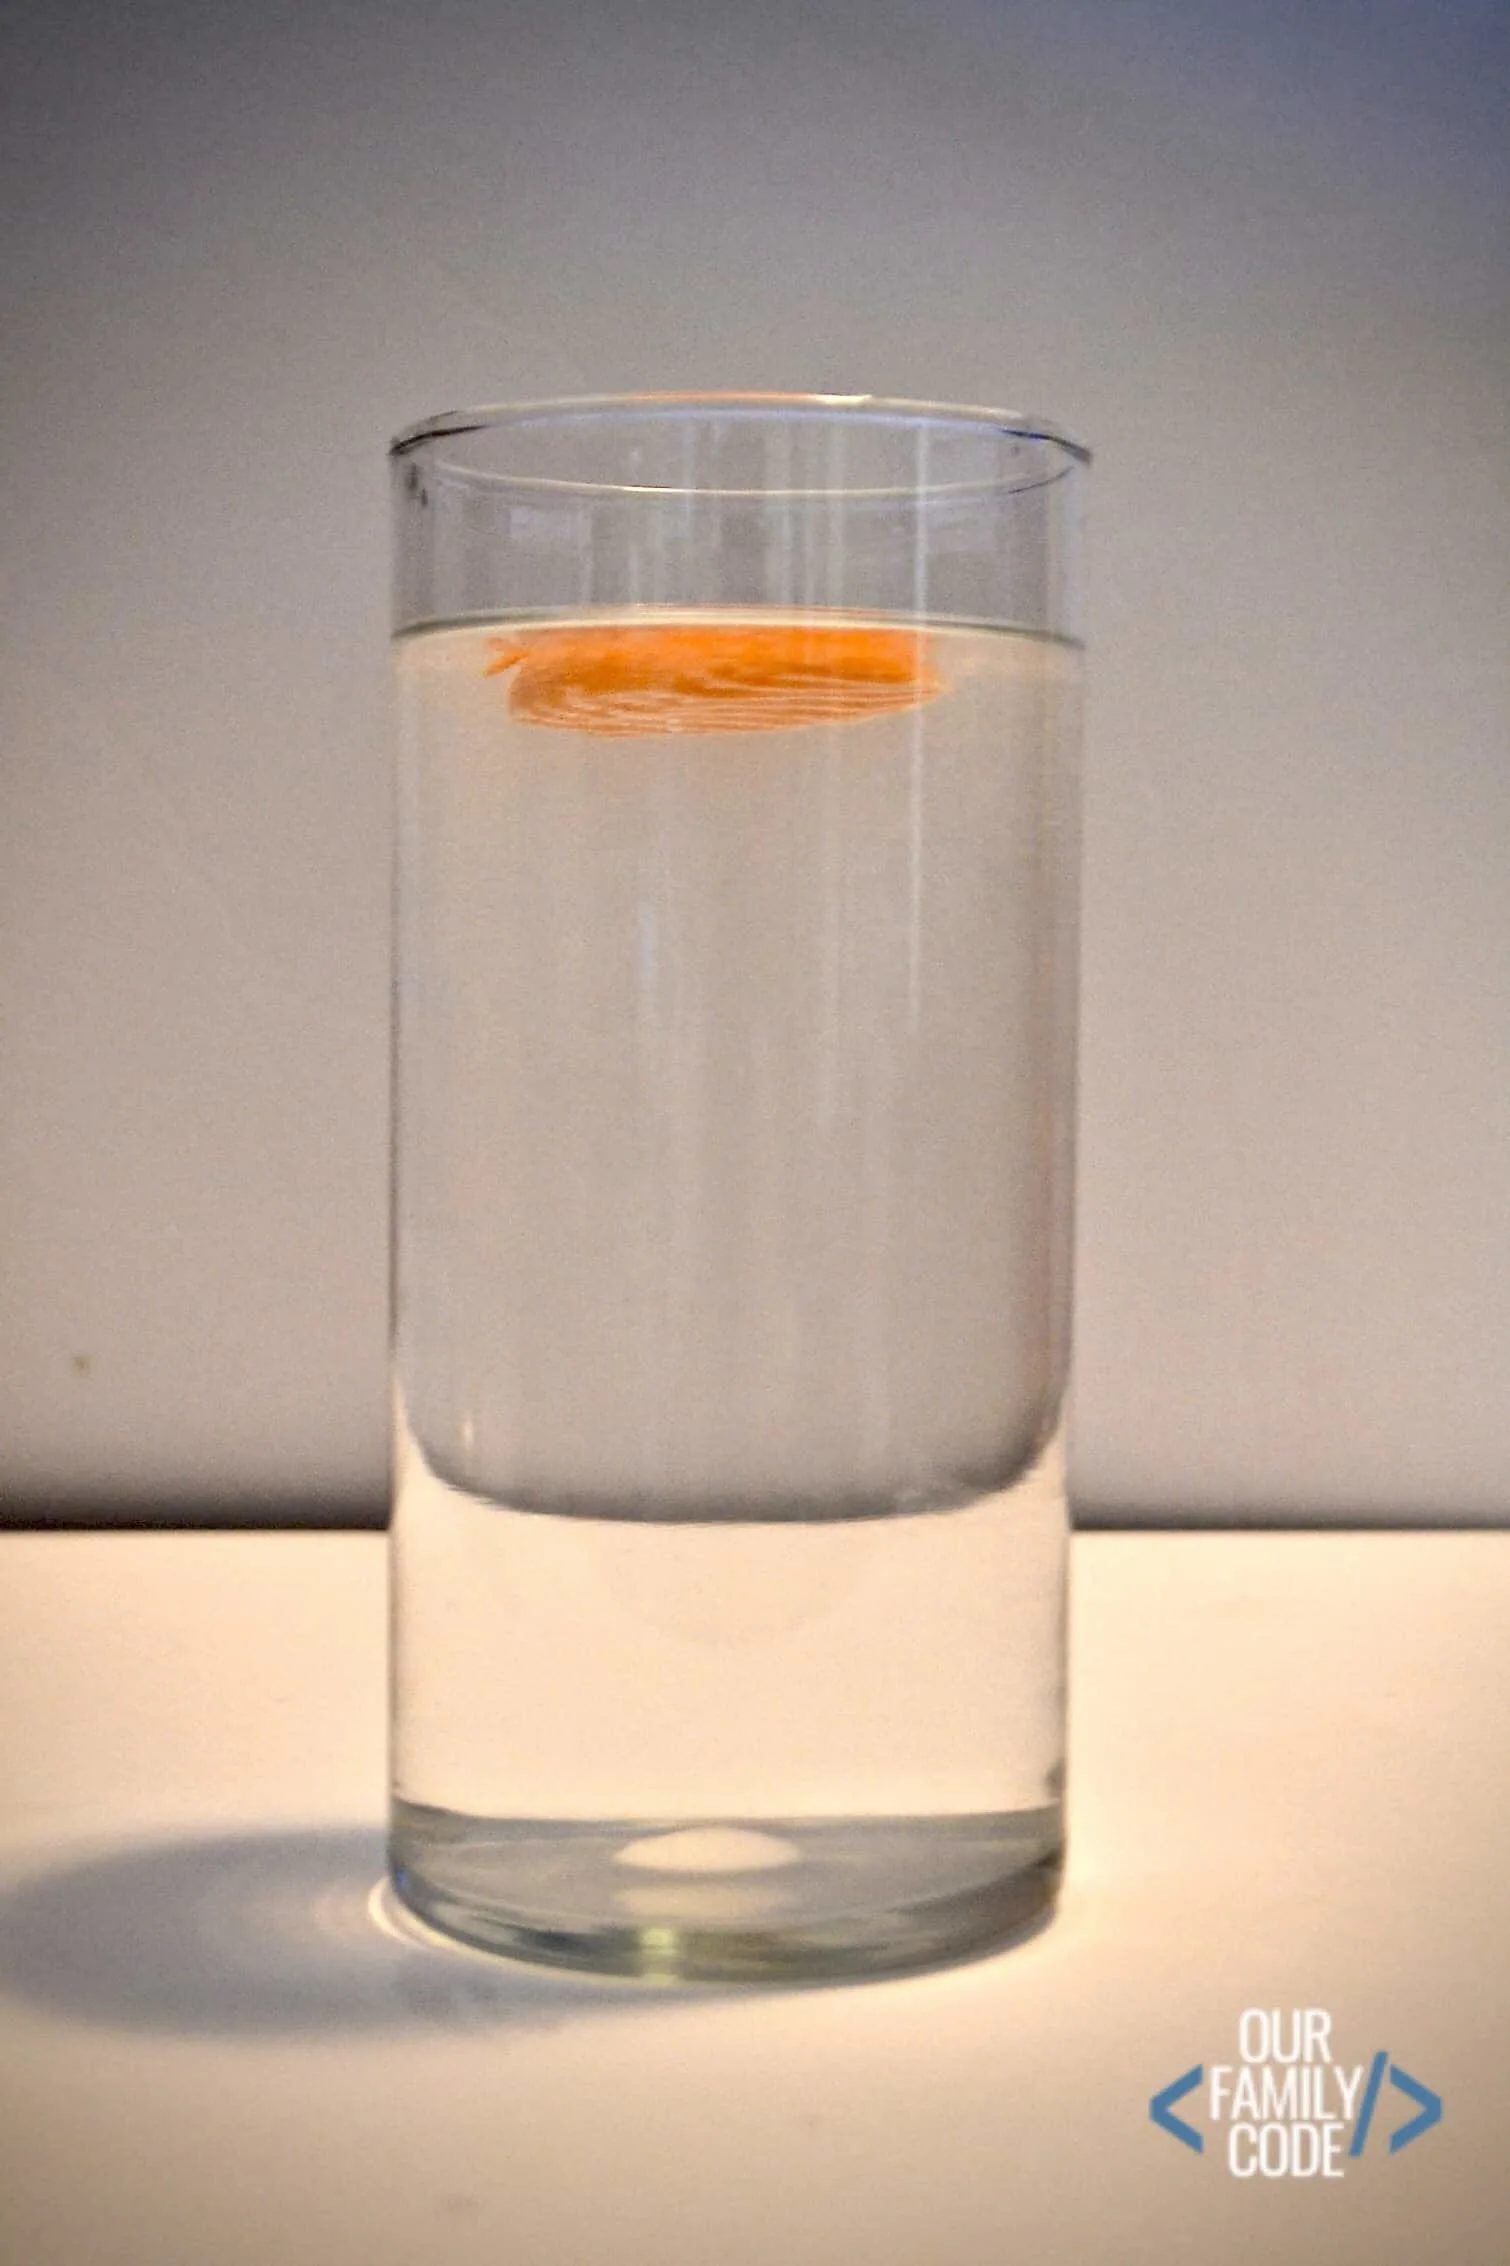 Floating Carrot in Salt Water Experiment